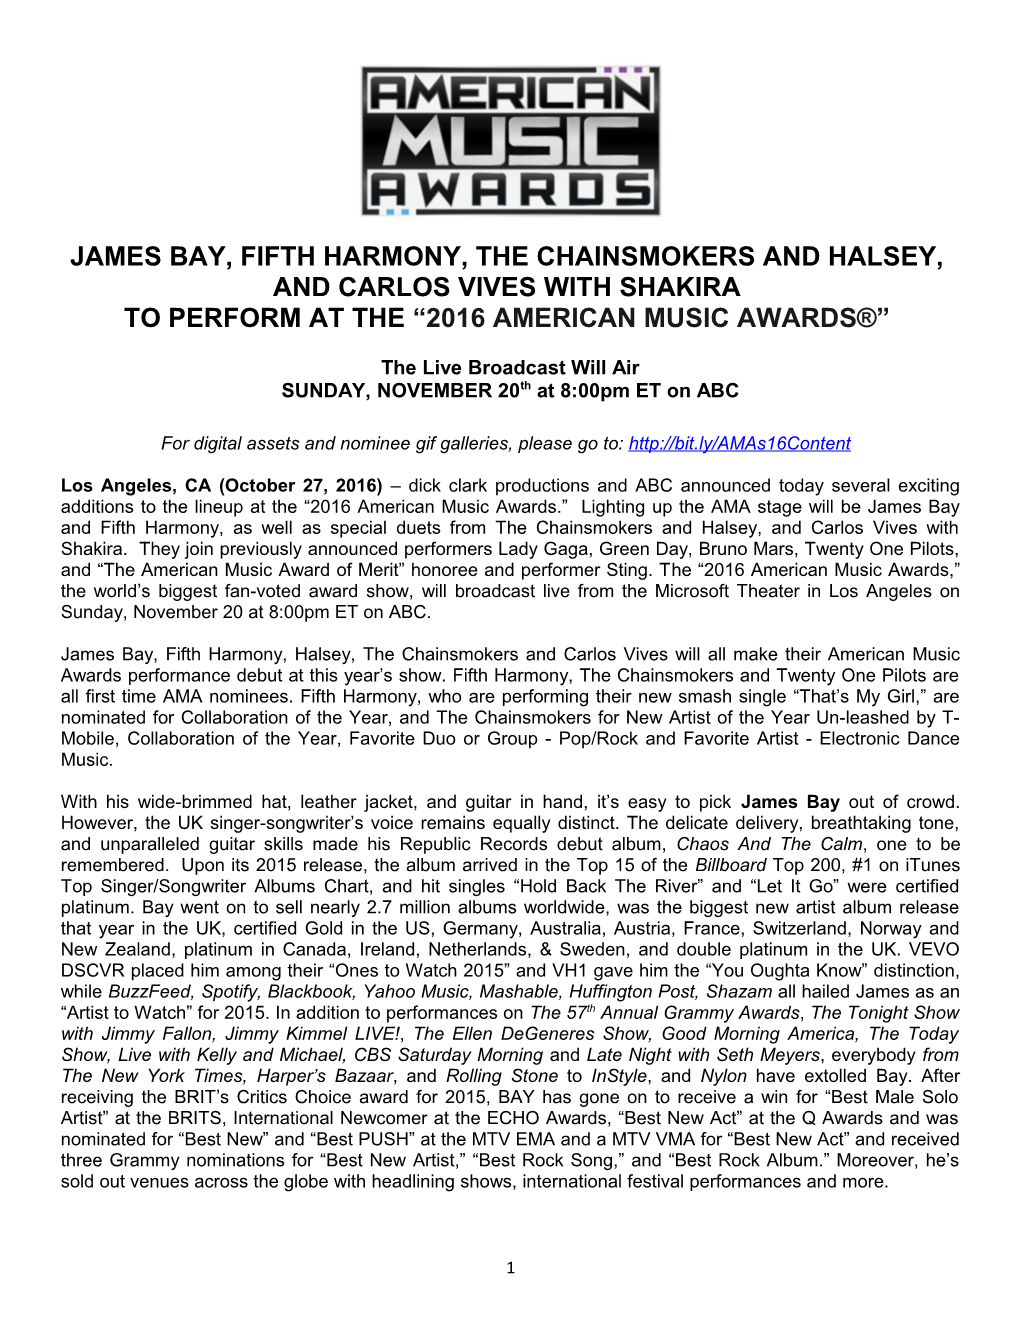 James Bay, Fifth Harmony,The Chainsmokers and Halsey